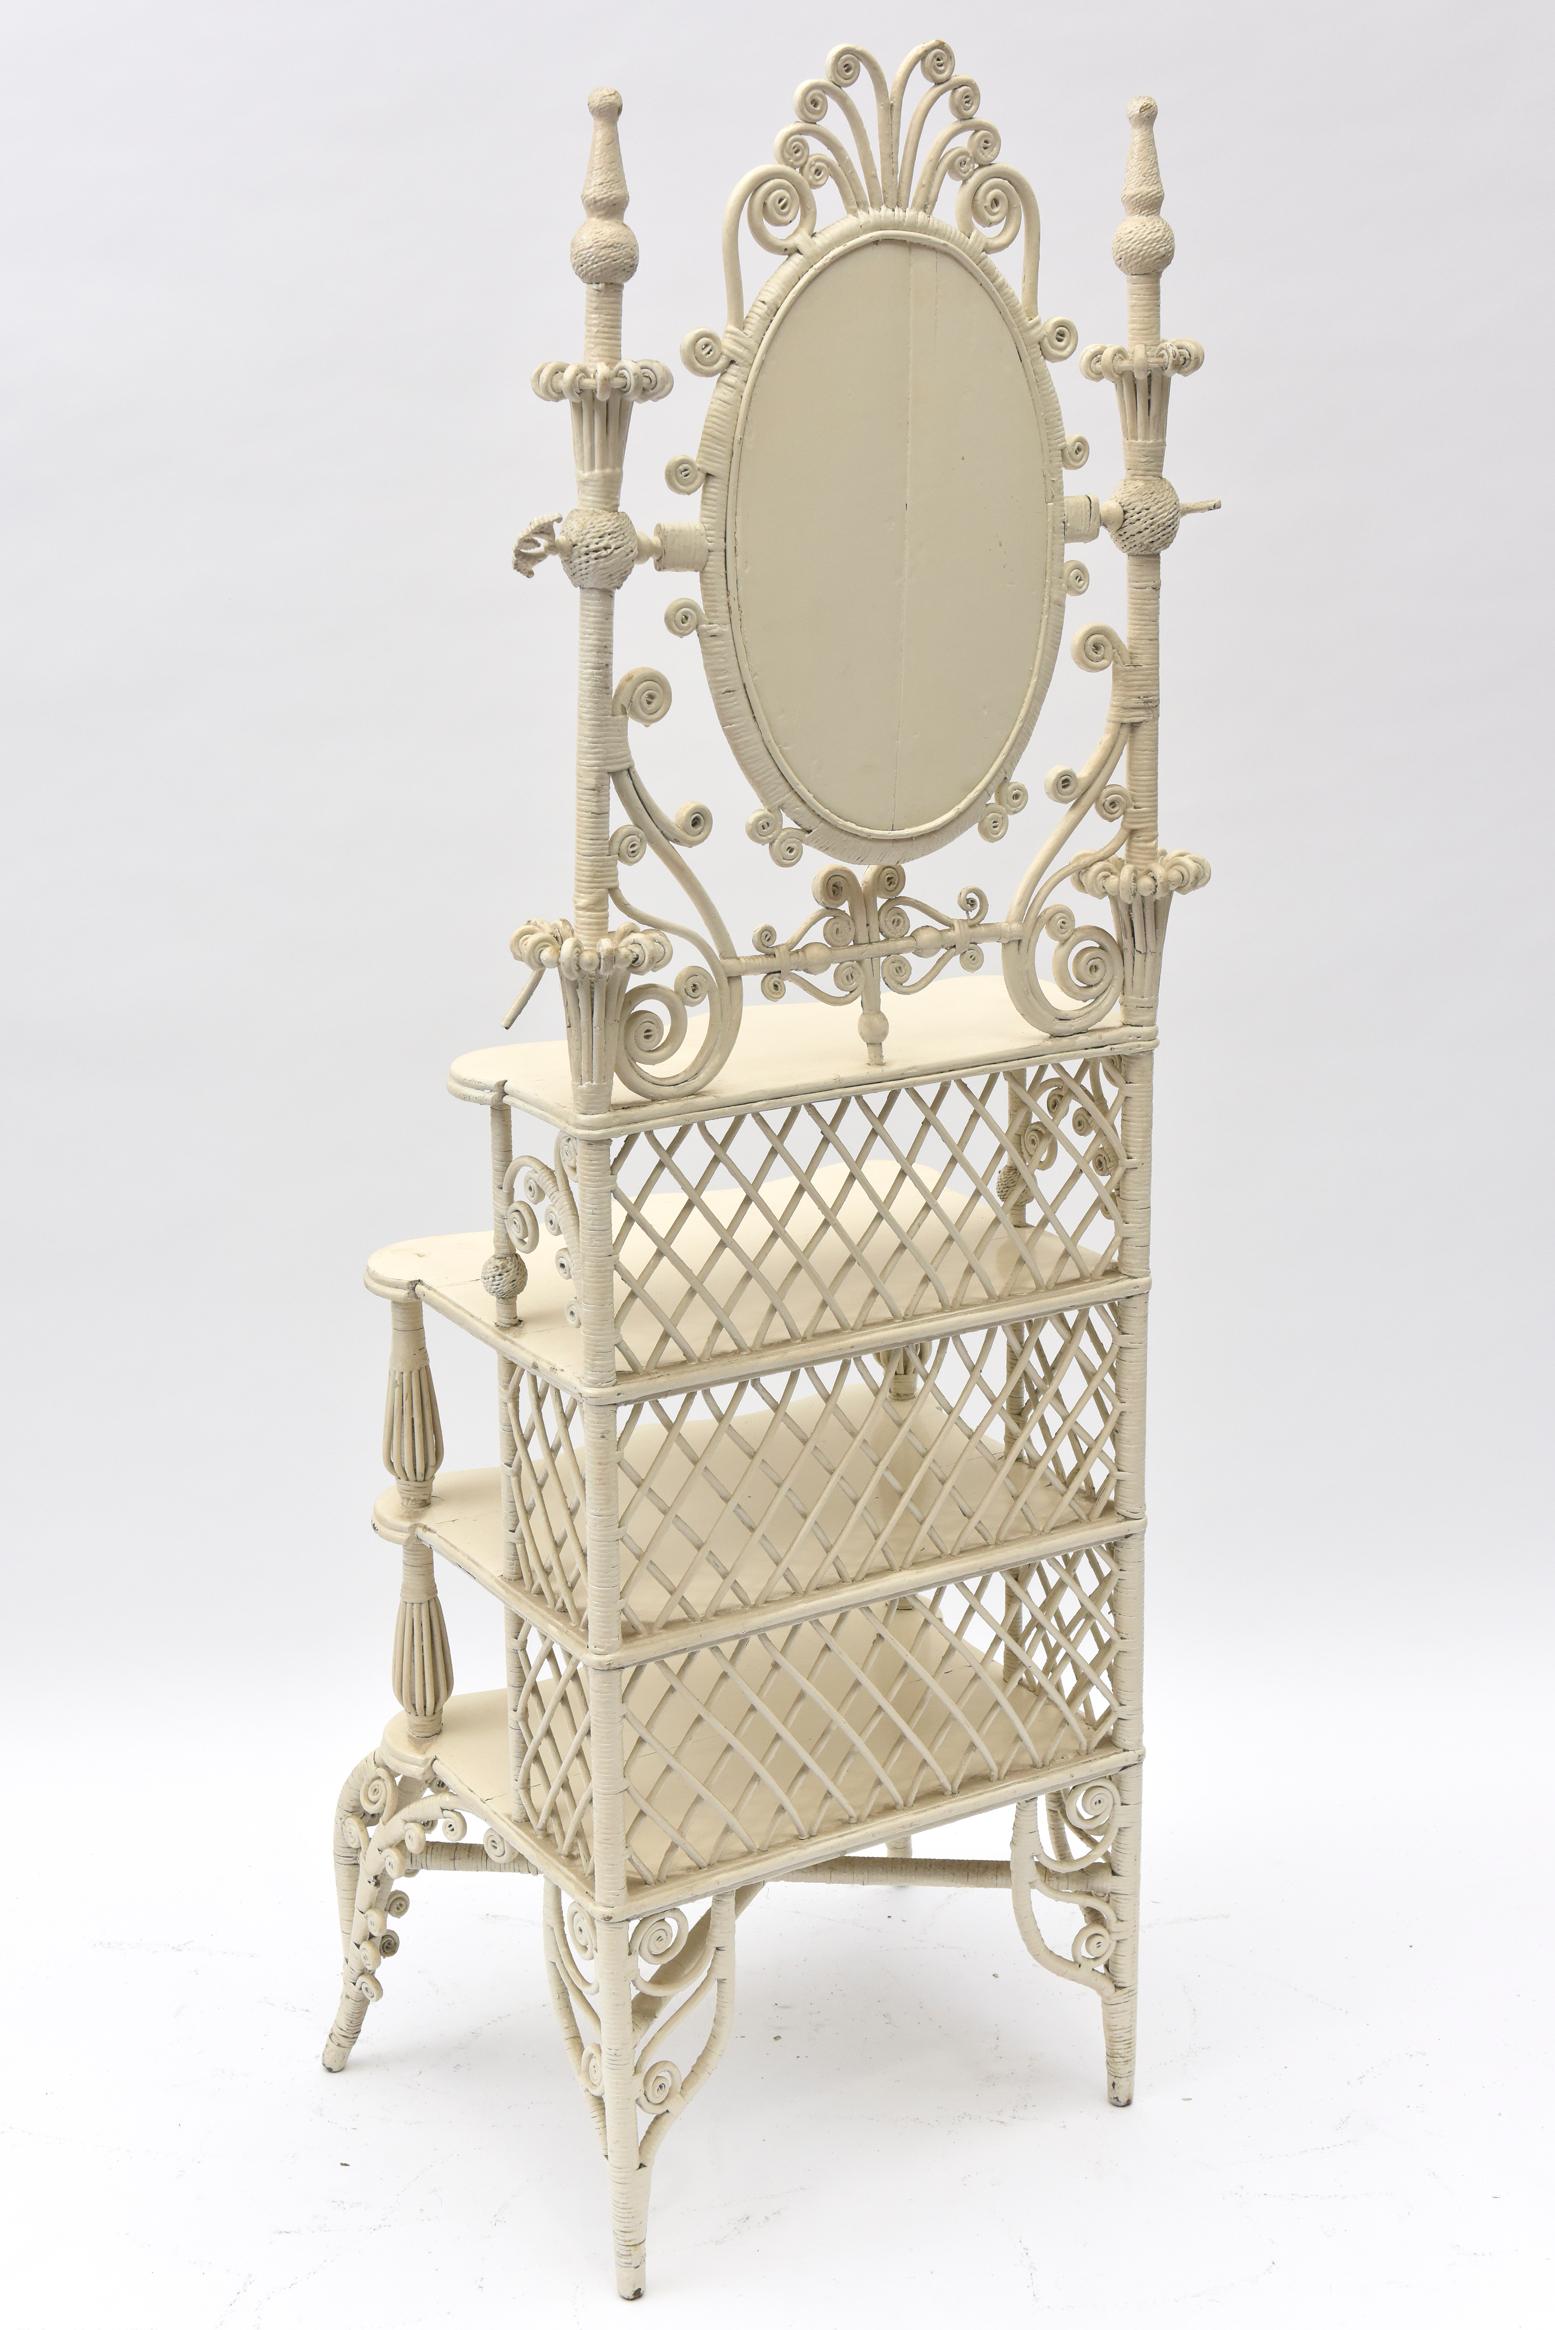 Victorian Wicker Mirrored Shaving or Vanity Stand with Shelves 1